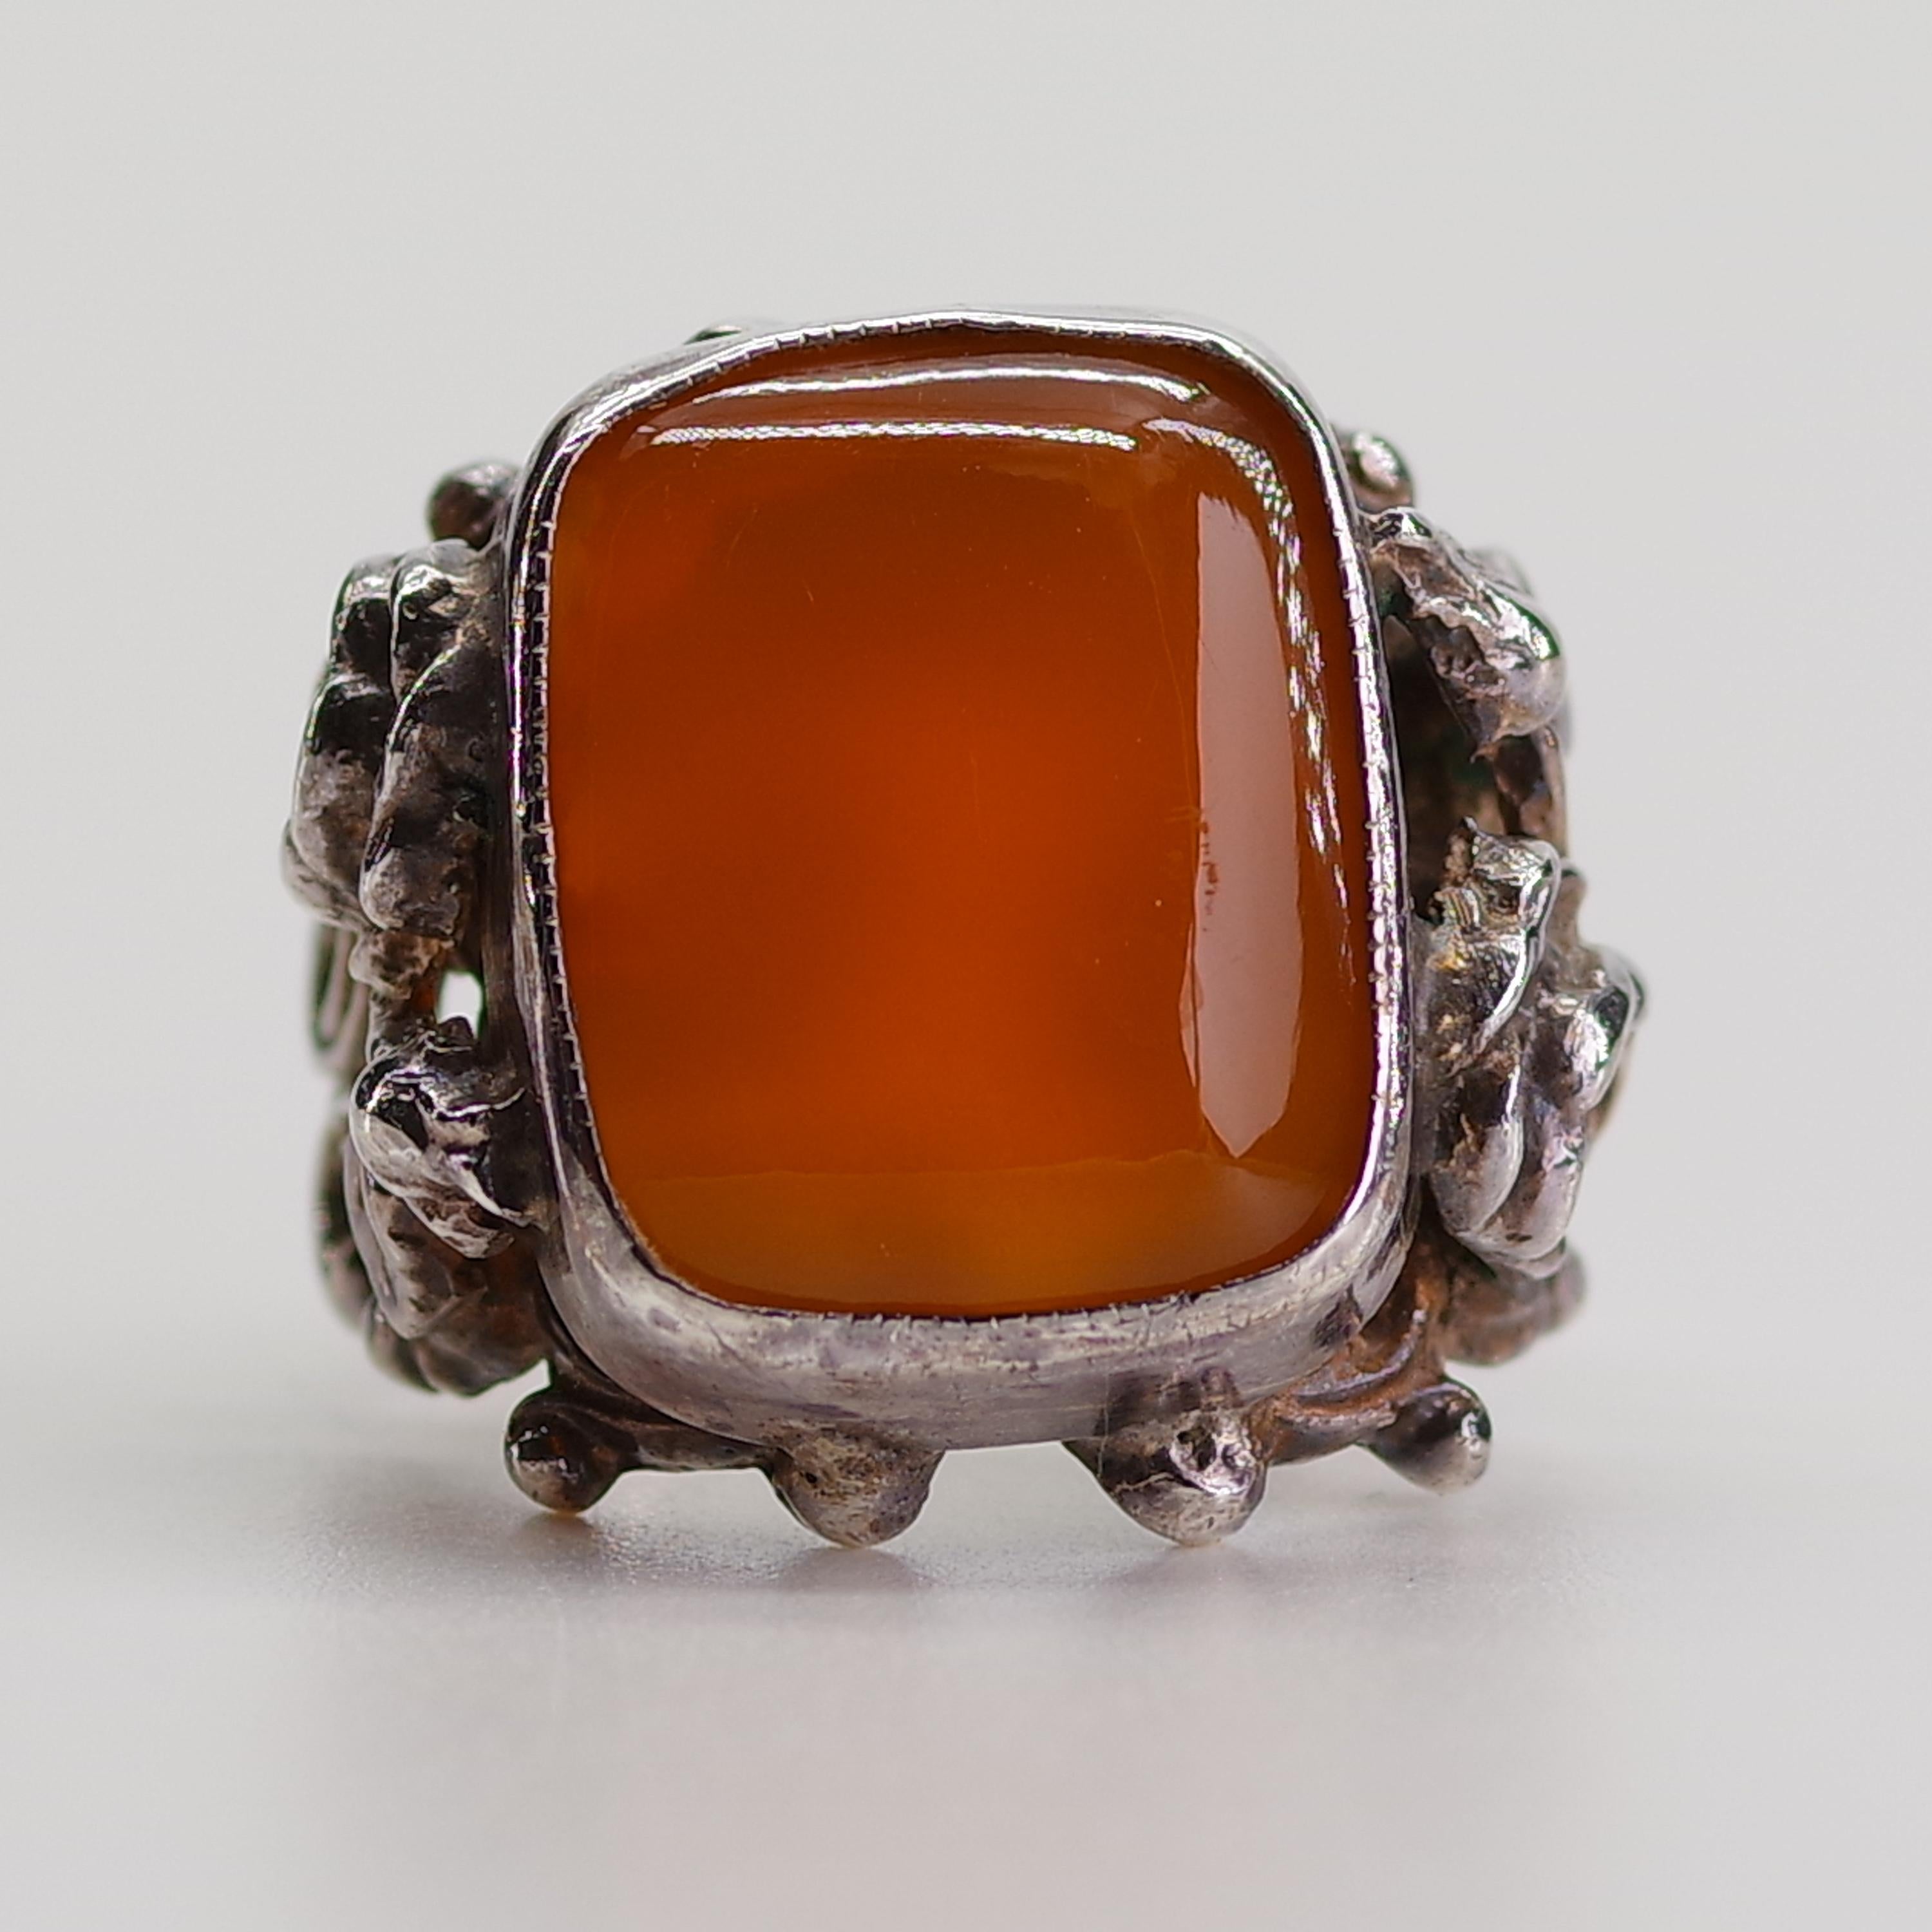 Created in London, England in 1896, this Carnelian ring features elaborately carved and pierced shoulders with a fanciful Baroque motif depicting roses, rosebuds, and leaves.  The rose, of course, is the official flower of England and has been